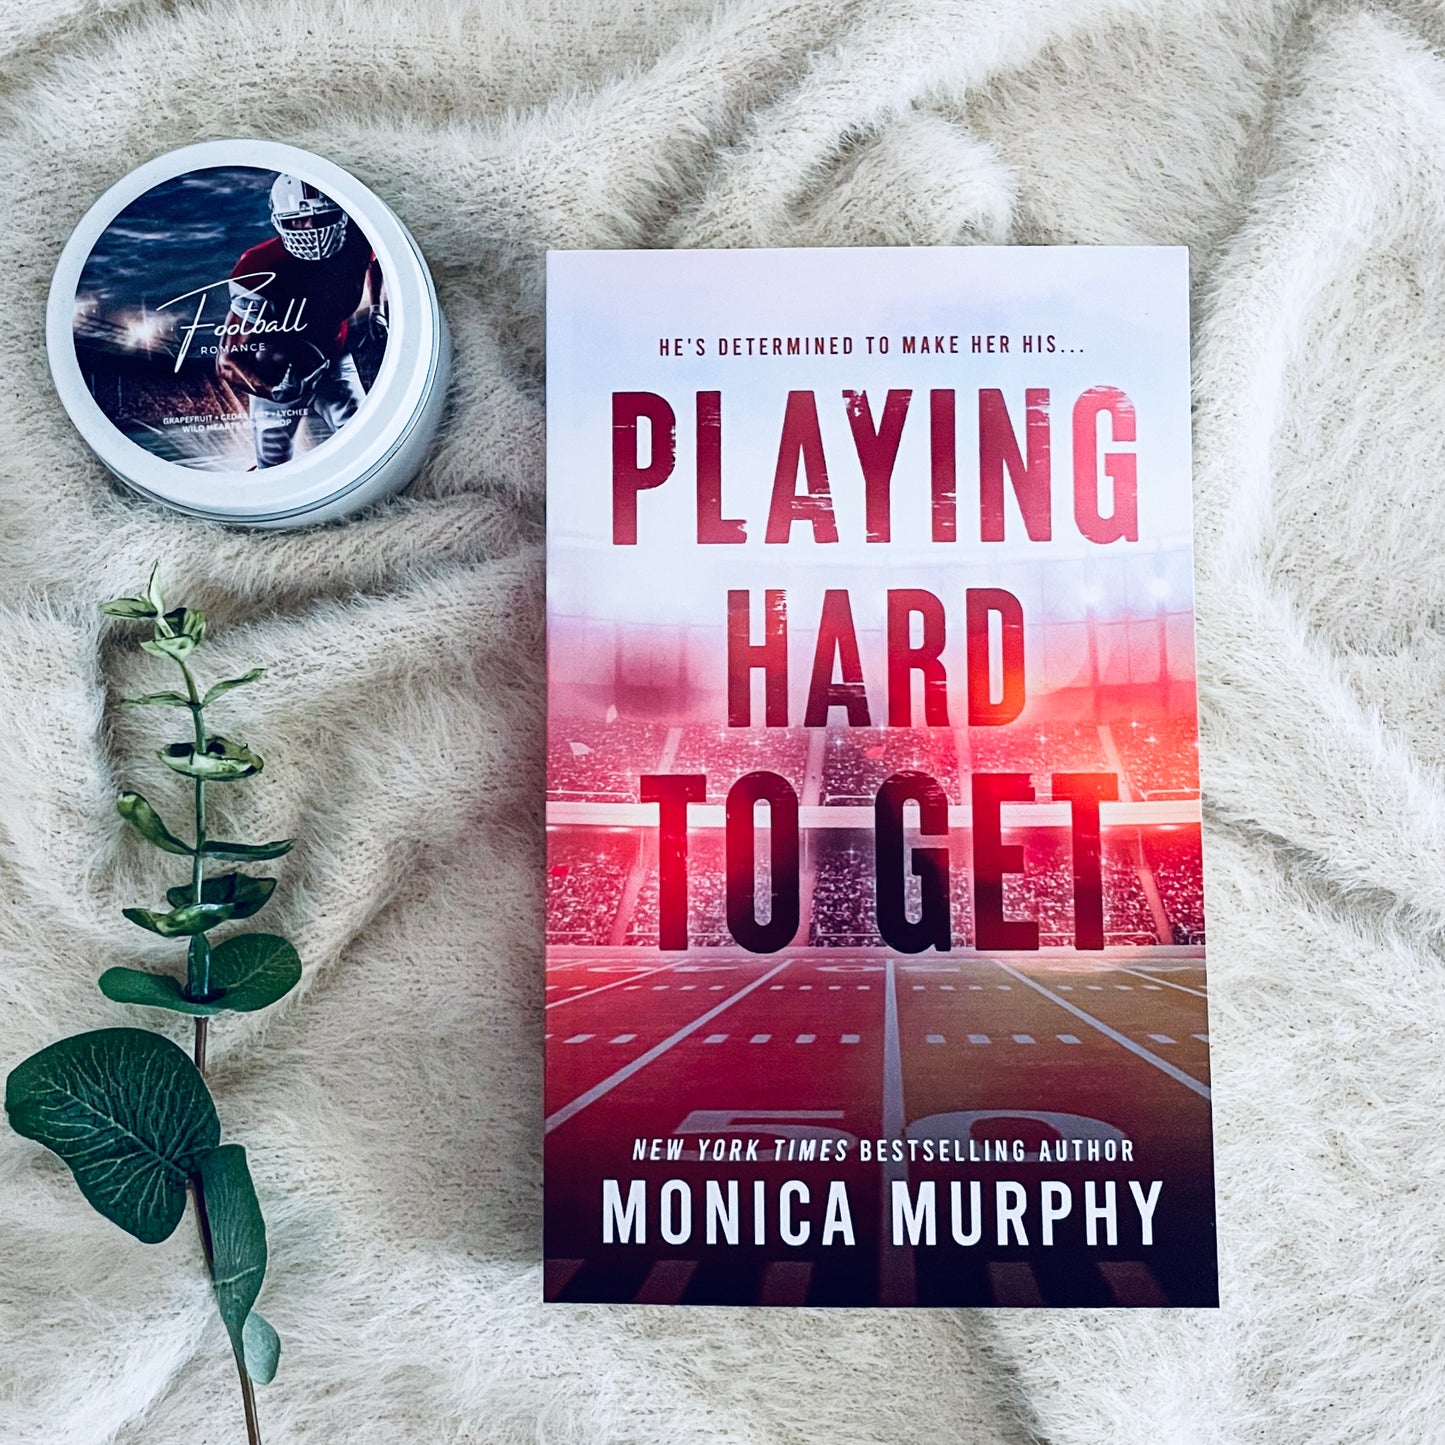 The Players series by Monica Murphy